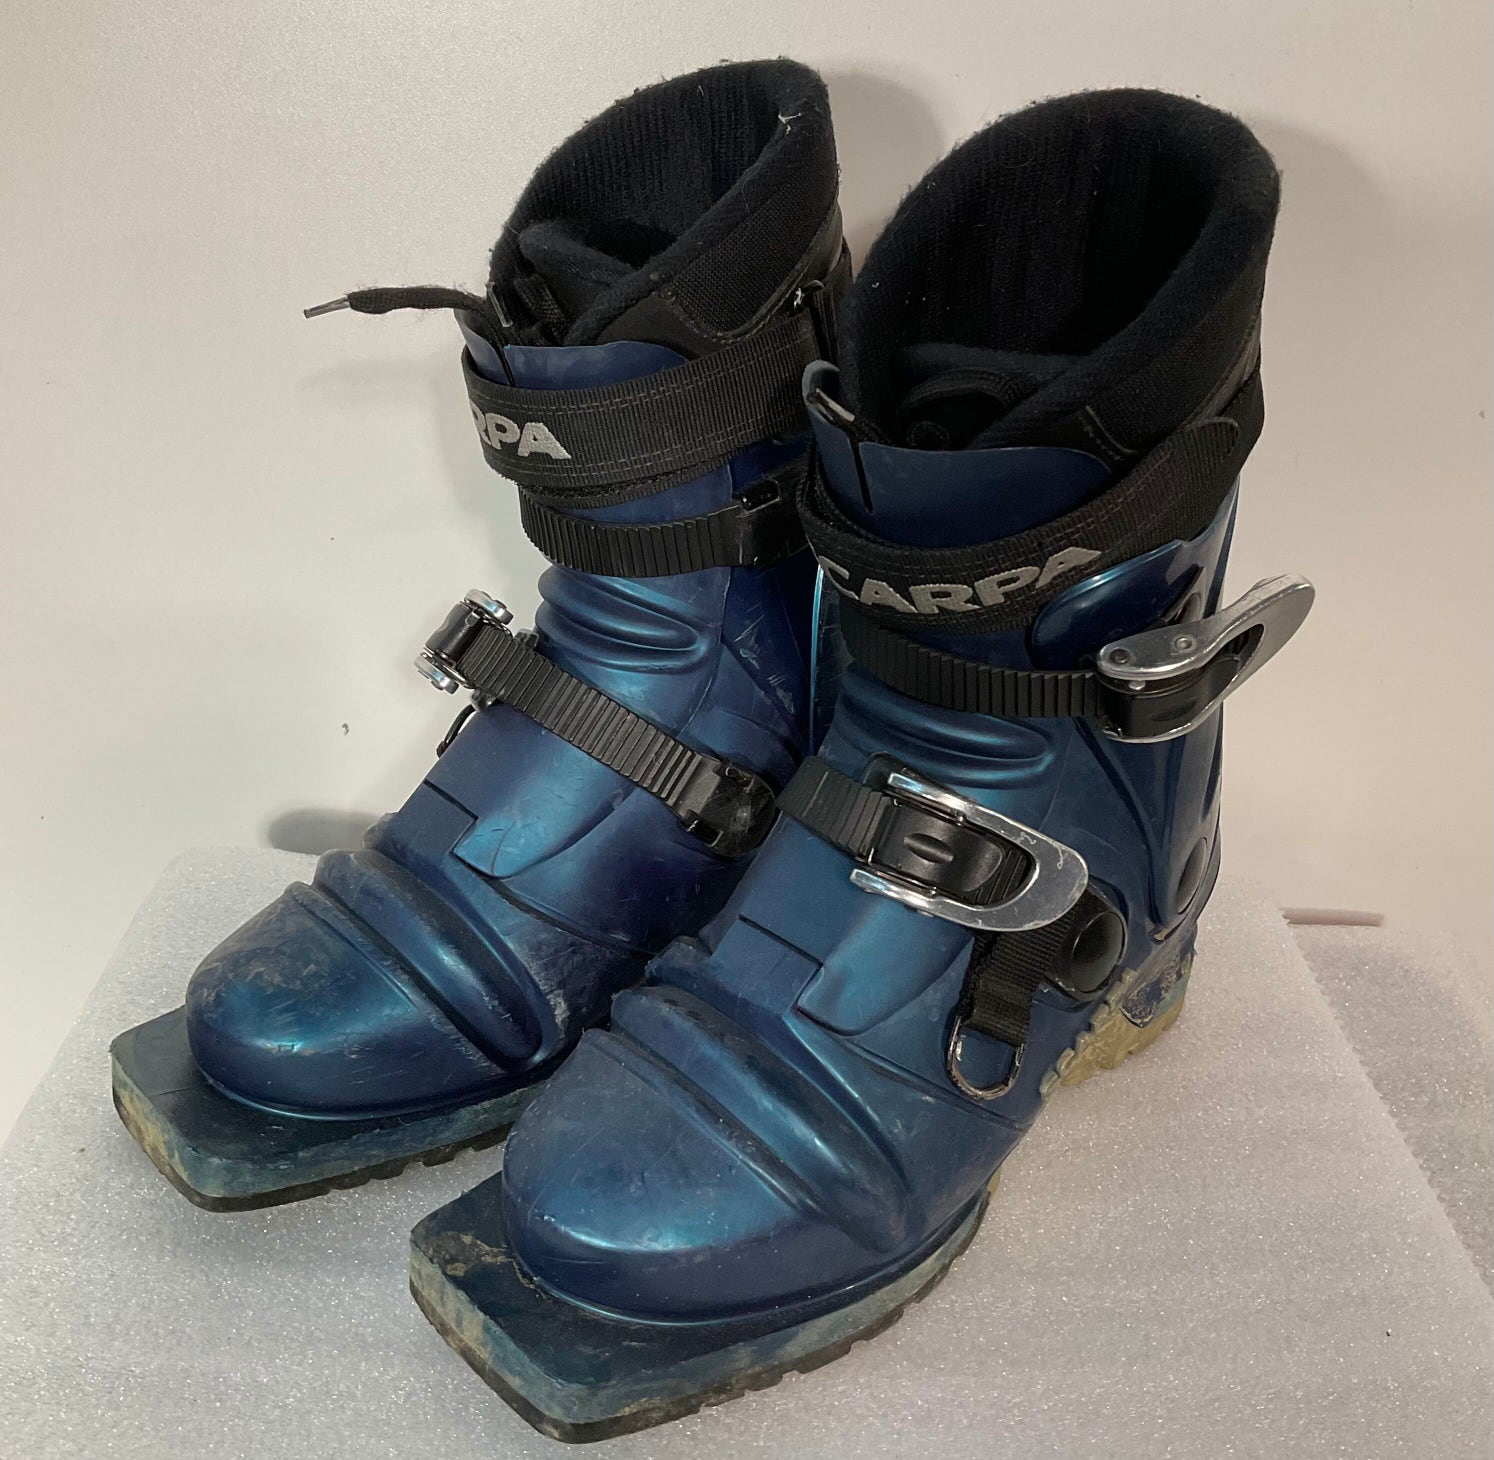 Used Women's Scarpa Telemark Ski Boots Size 6.5 (SY1194)